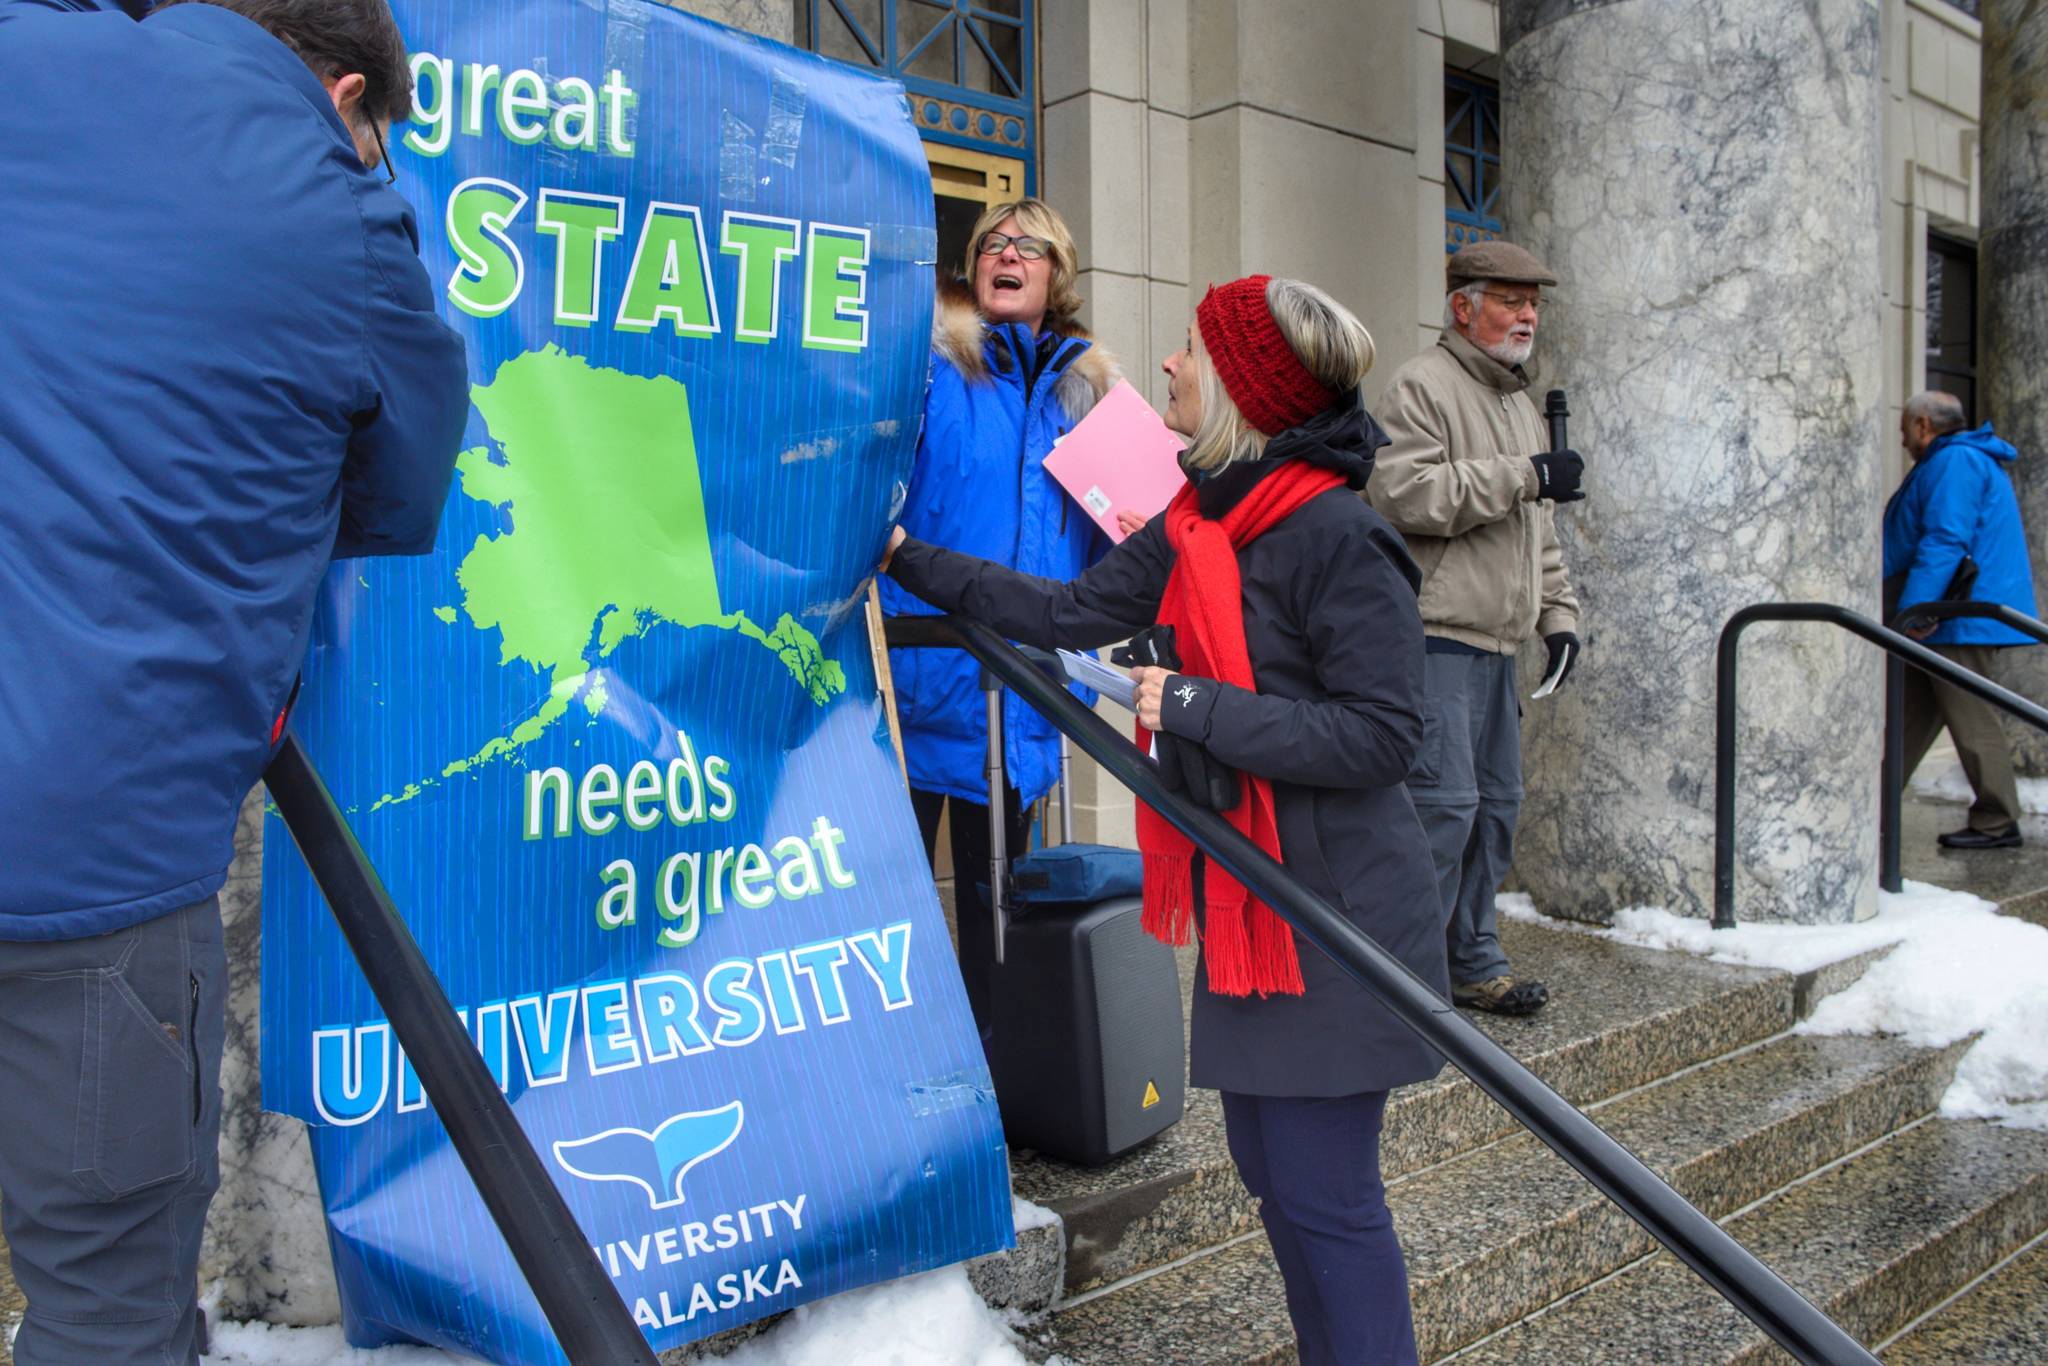 University of Alaska Southeast Instructor Jim Powell, left, his wife, former Rep. Beth Kerttula, and Rep. Andi Story, D-Juneau, right, stand up a university sign as former Chancellor John Pugh speaks at a rally for funding the University of Alaska in front of the Capitol on Wednesday, Feb. 13, 2019. (Michael Penn | Juneau Empire)